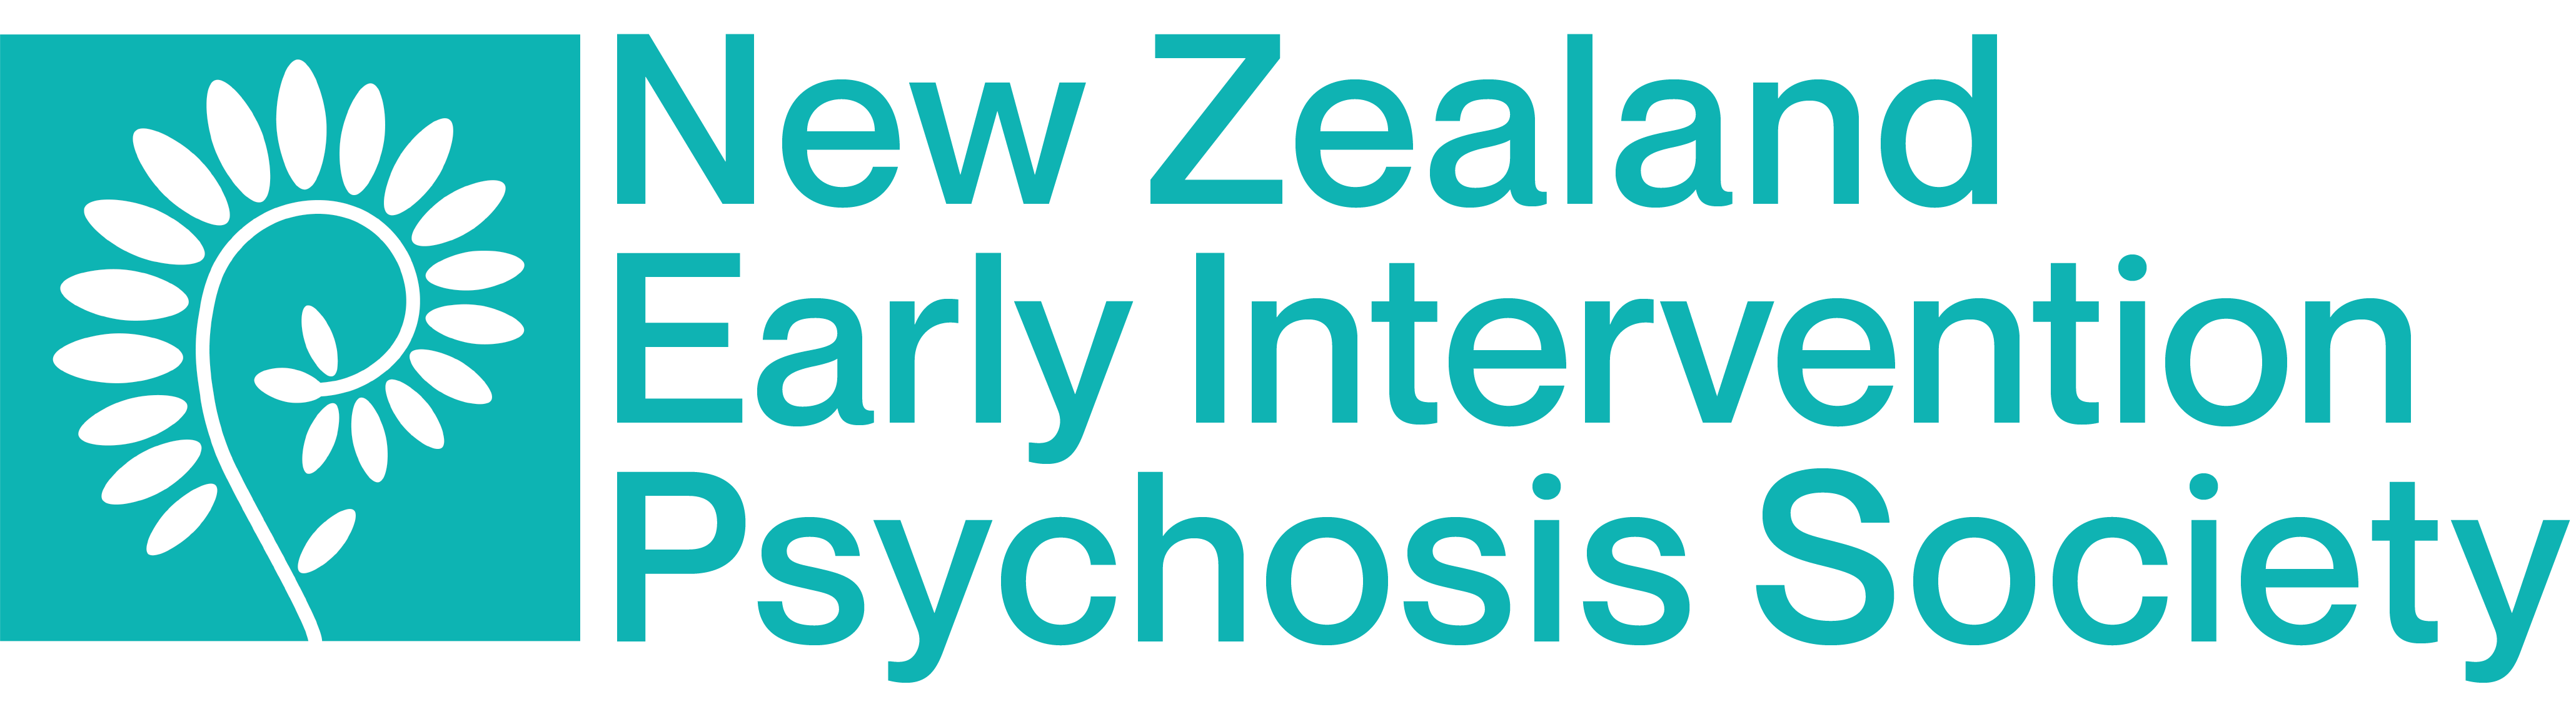 New Zealand Early Intervention in Psychosis Society